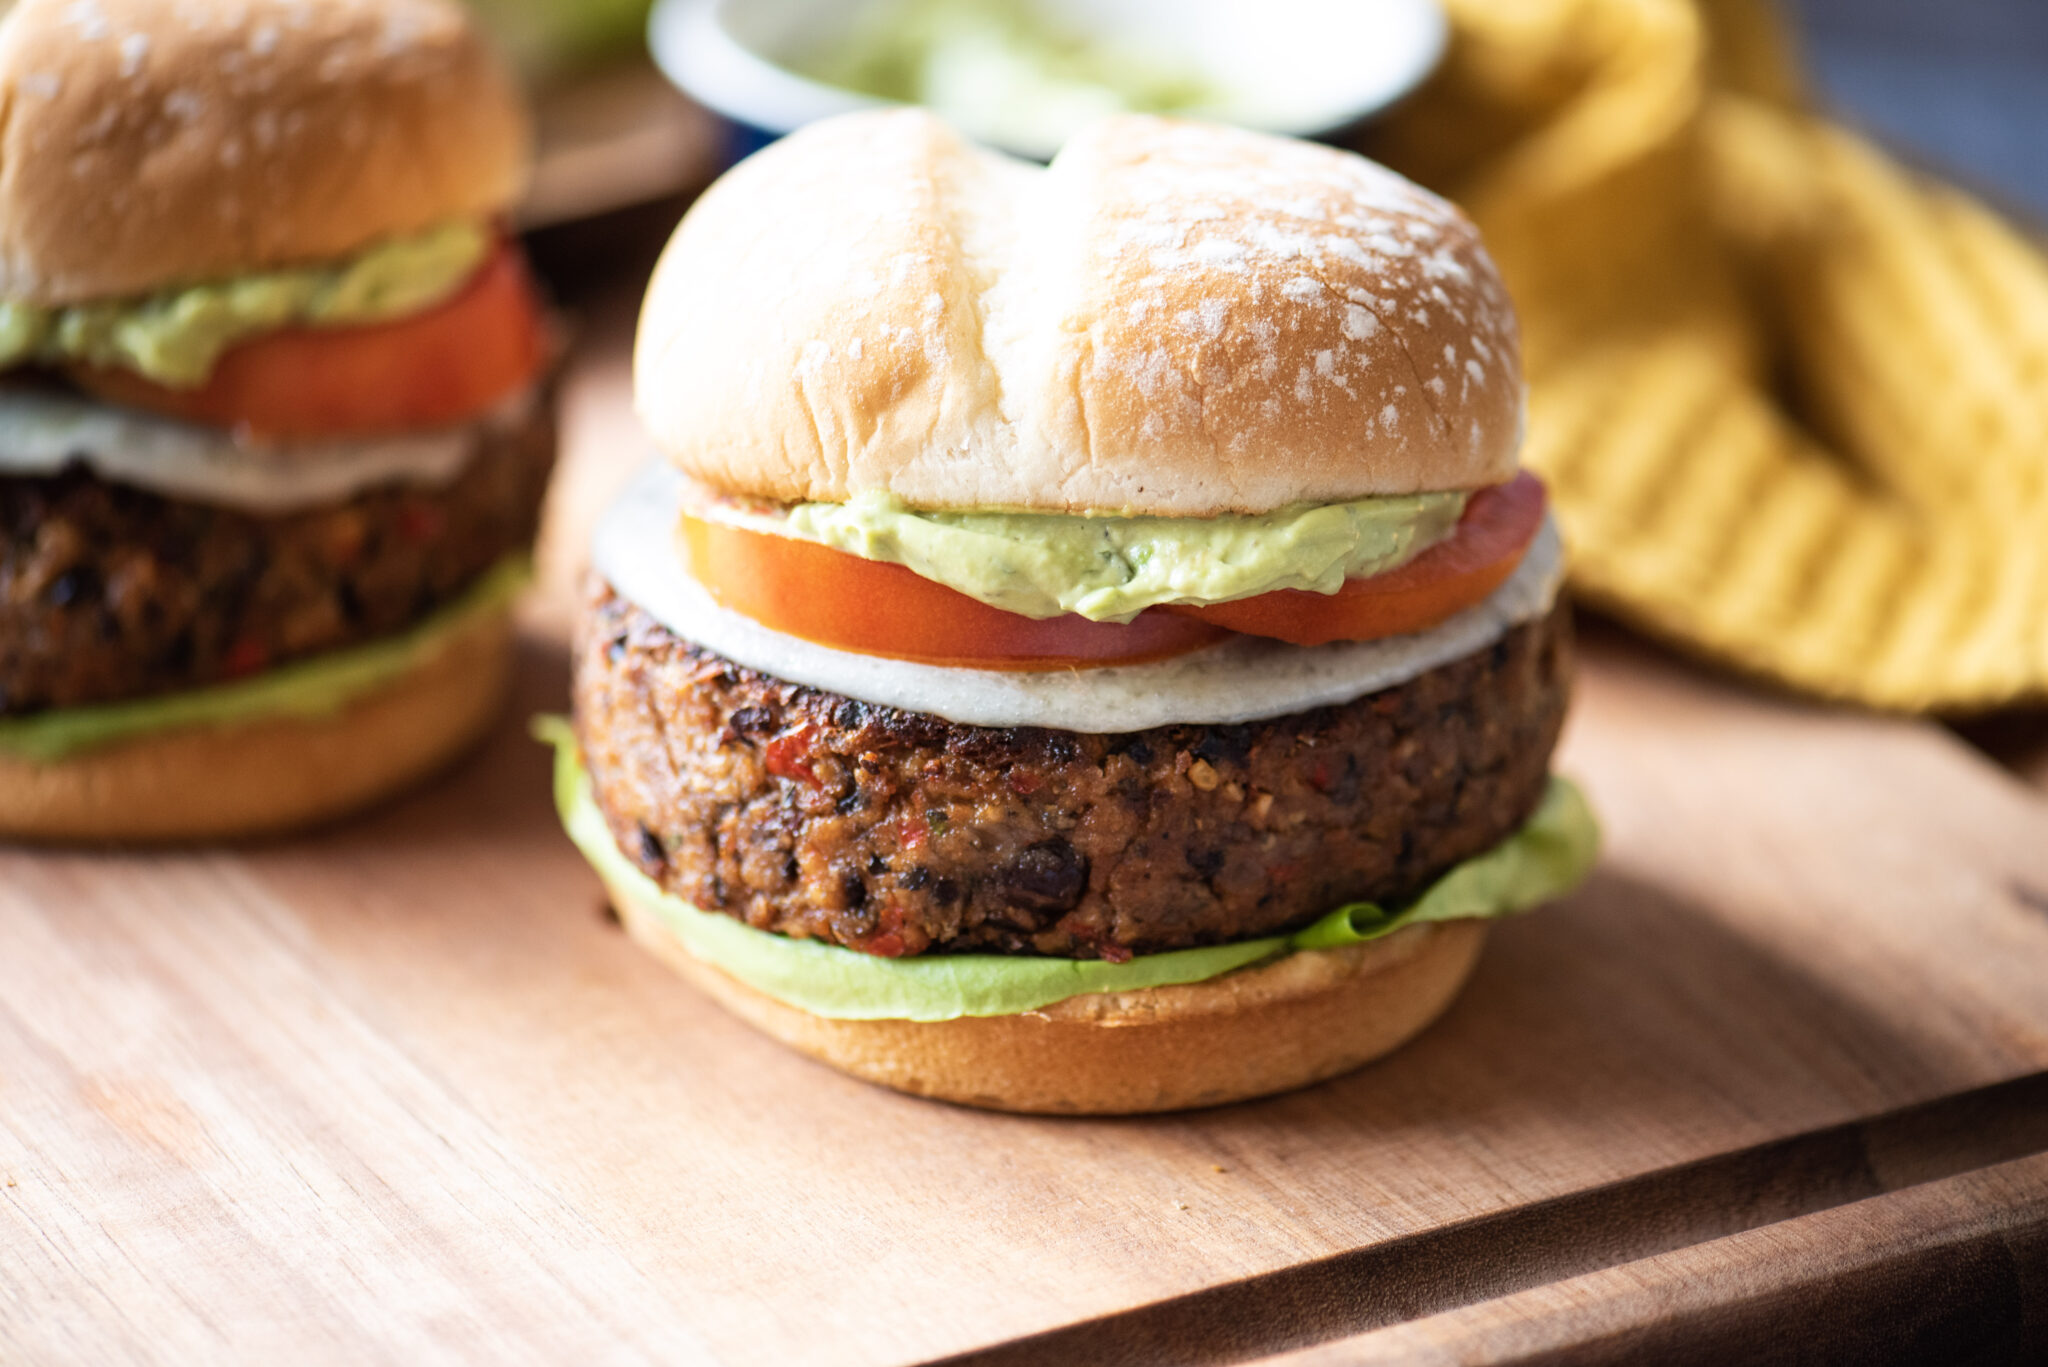 Black bean burger with avocado and other condiments in the background